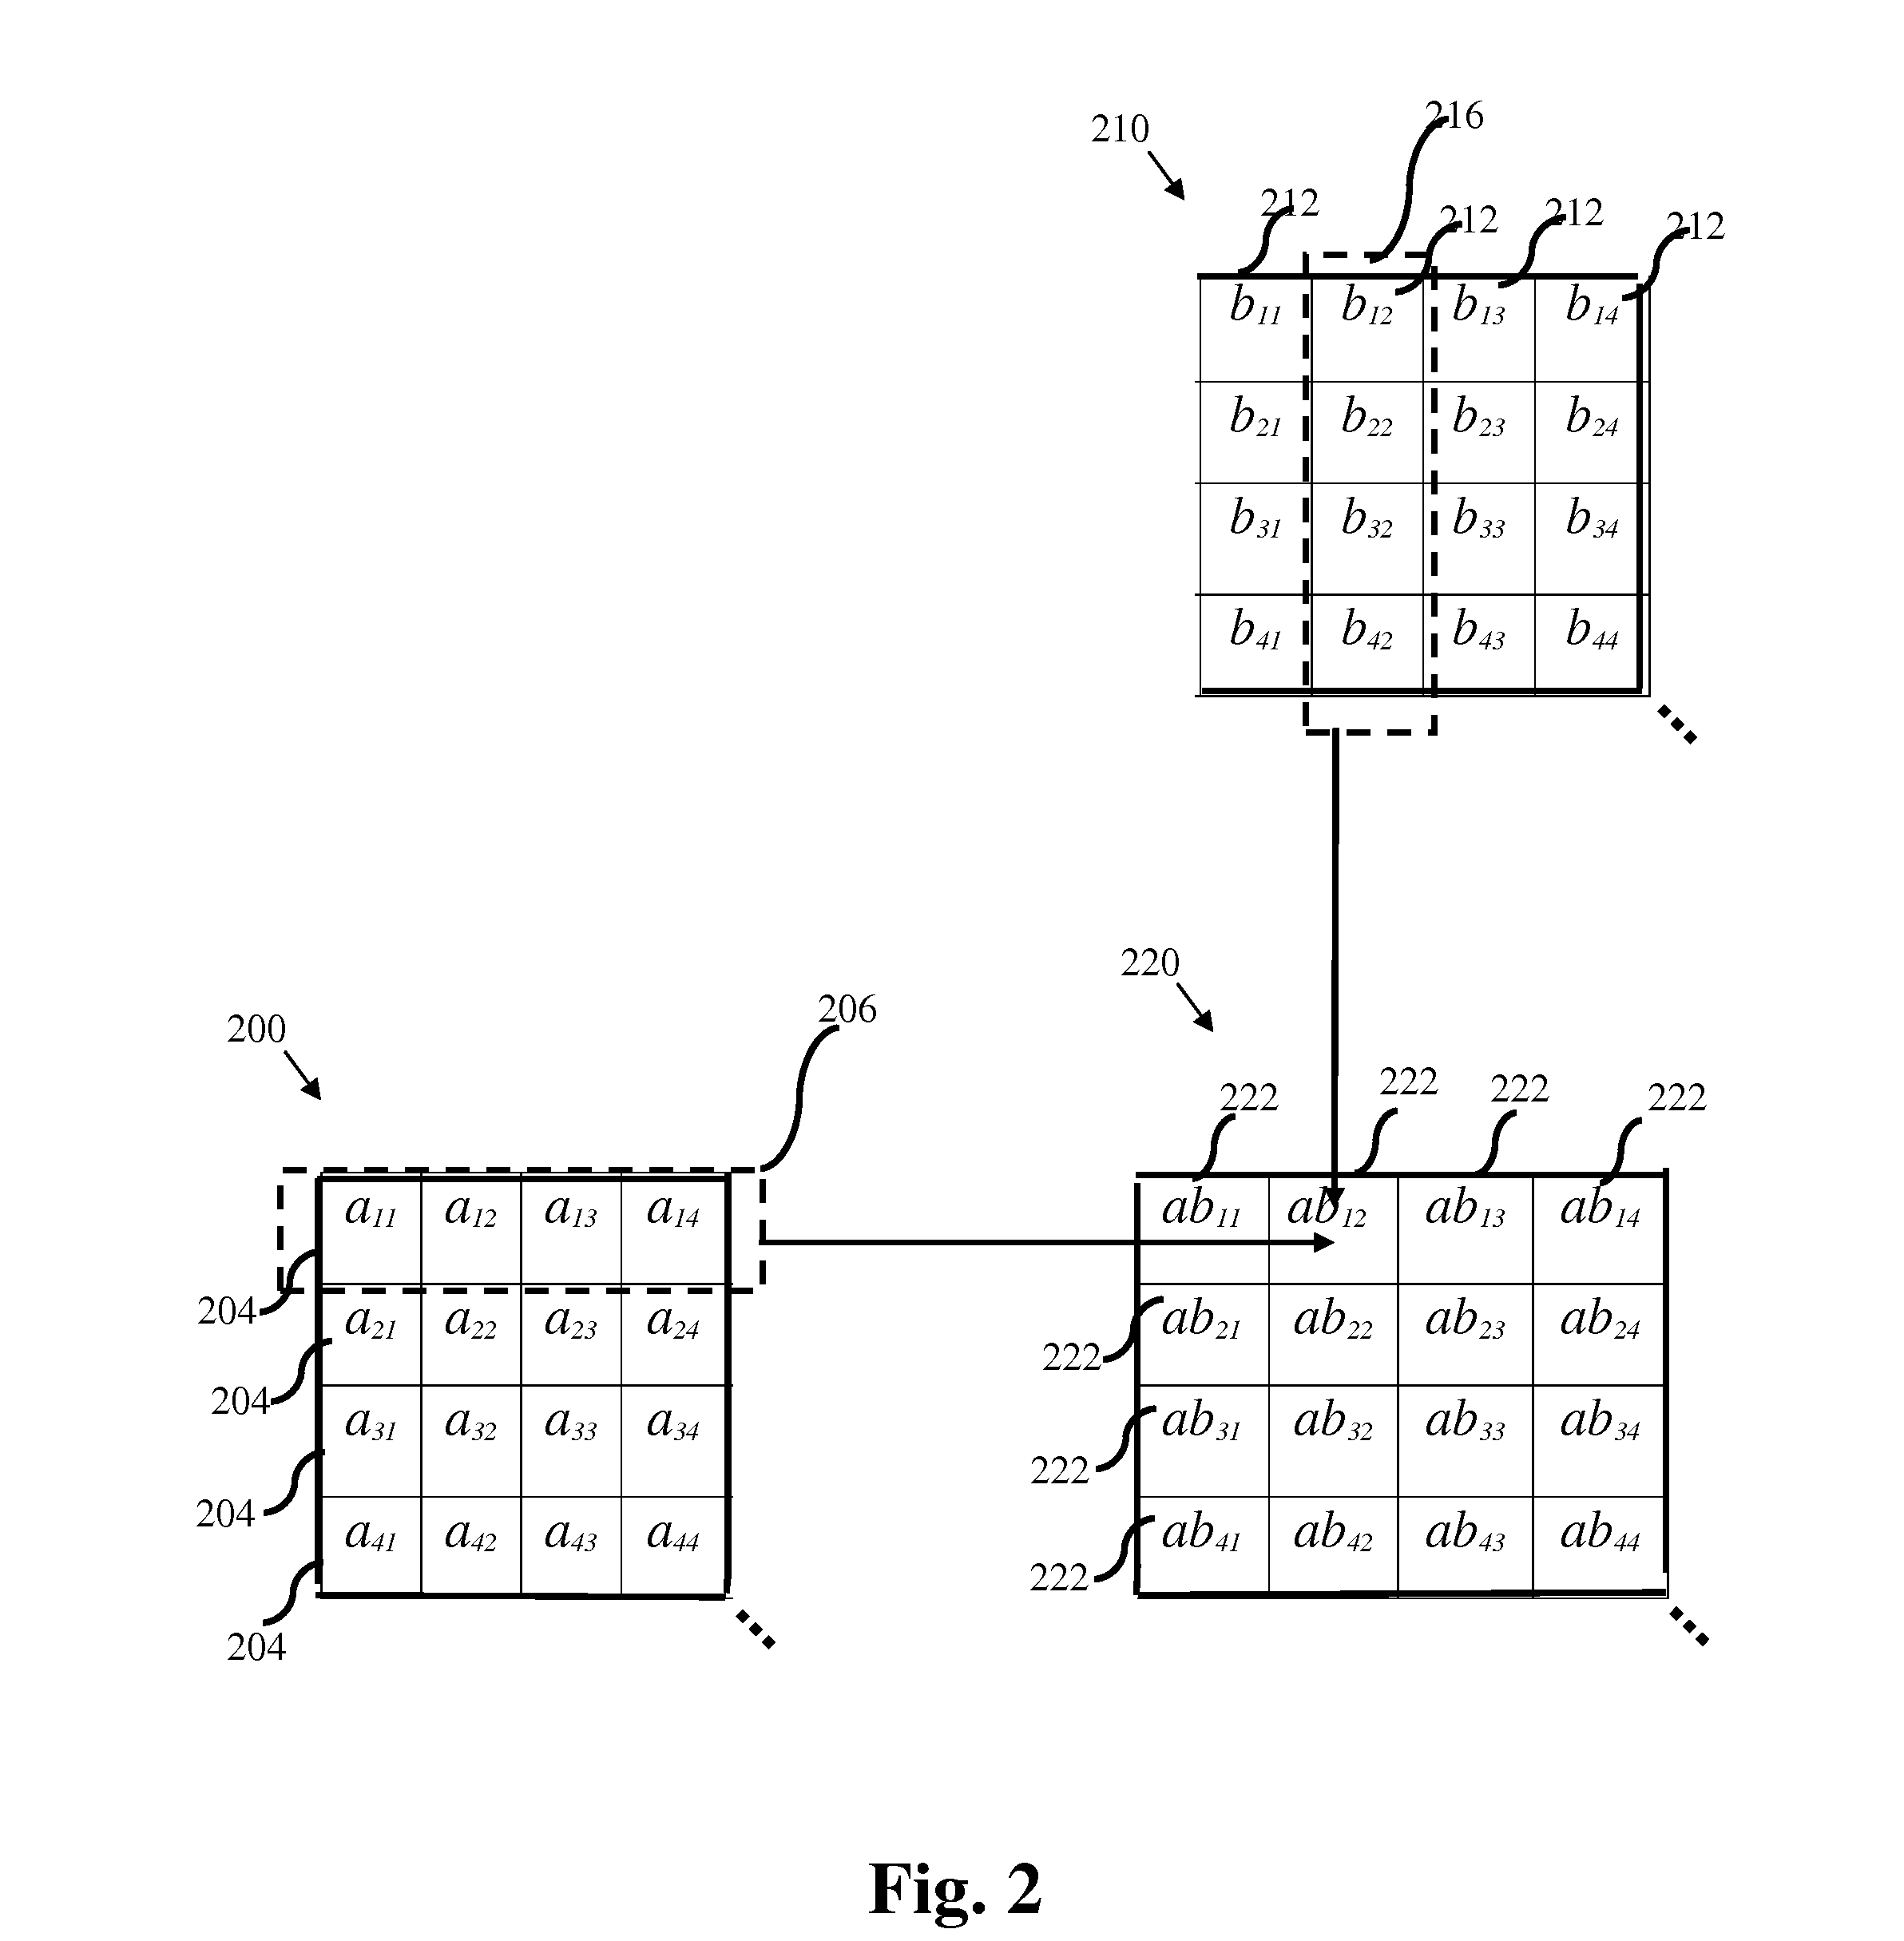 System, device, and method for multiplying multi-dimensional data arrays